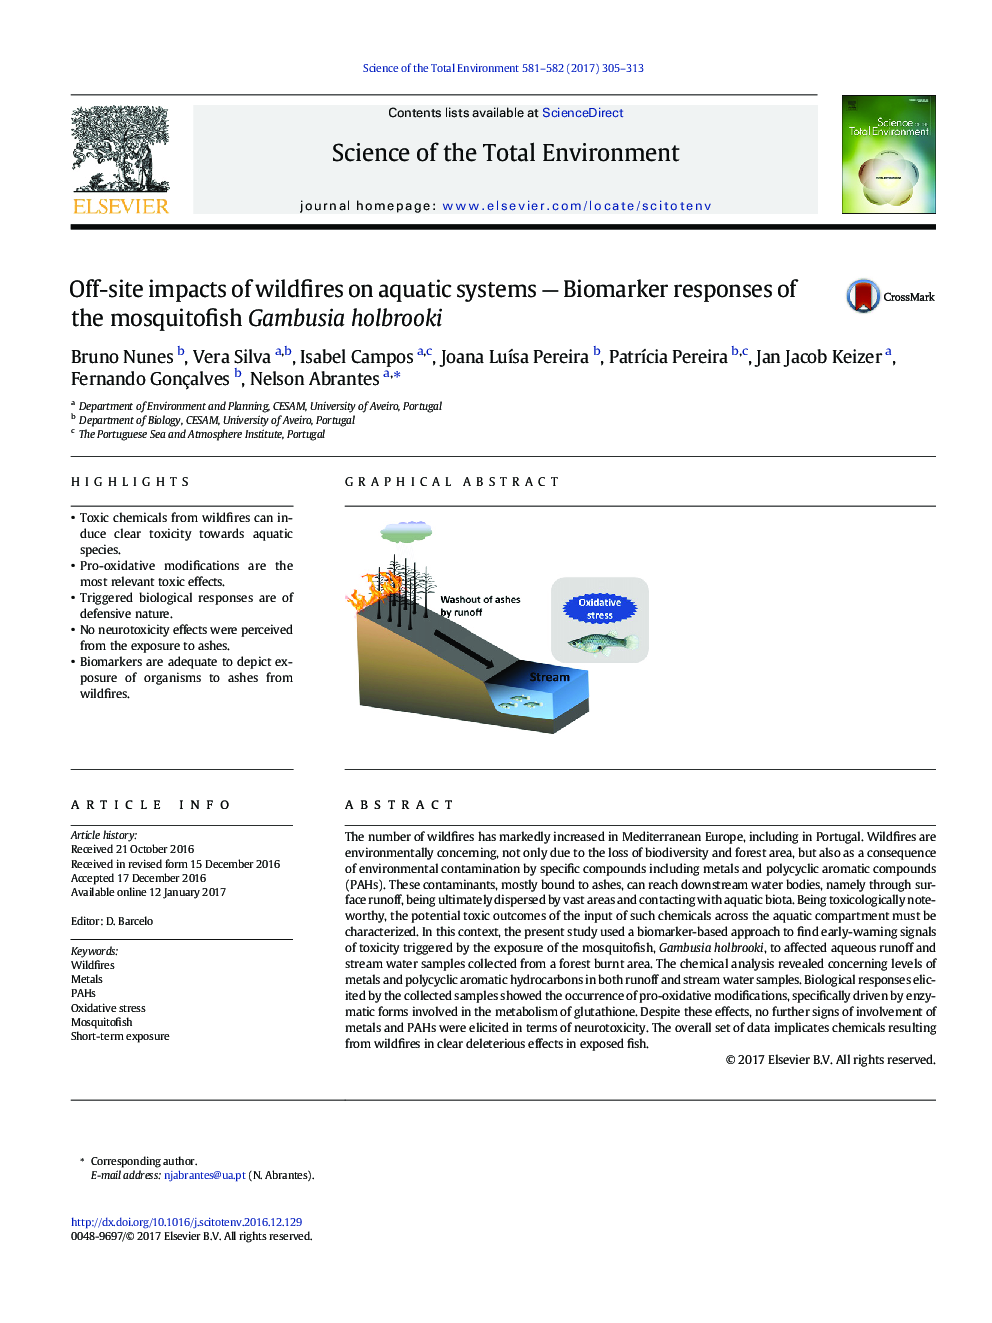 Off-site impacts of wildfires on aquatic systems - Biomarker responses of the mosquitofish Gambusia holbrooki